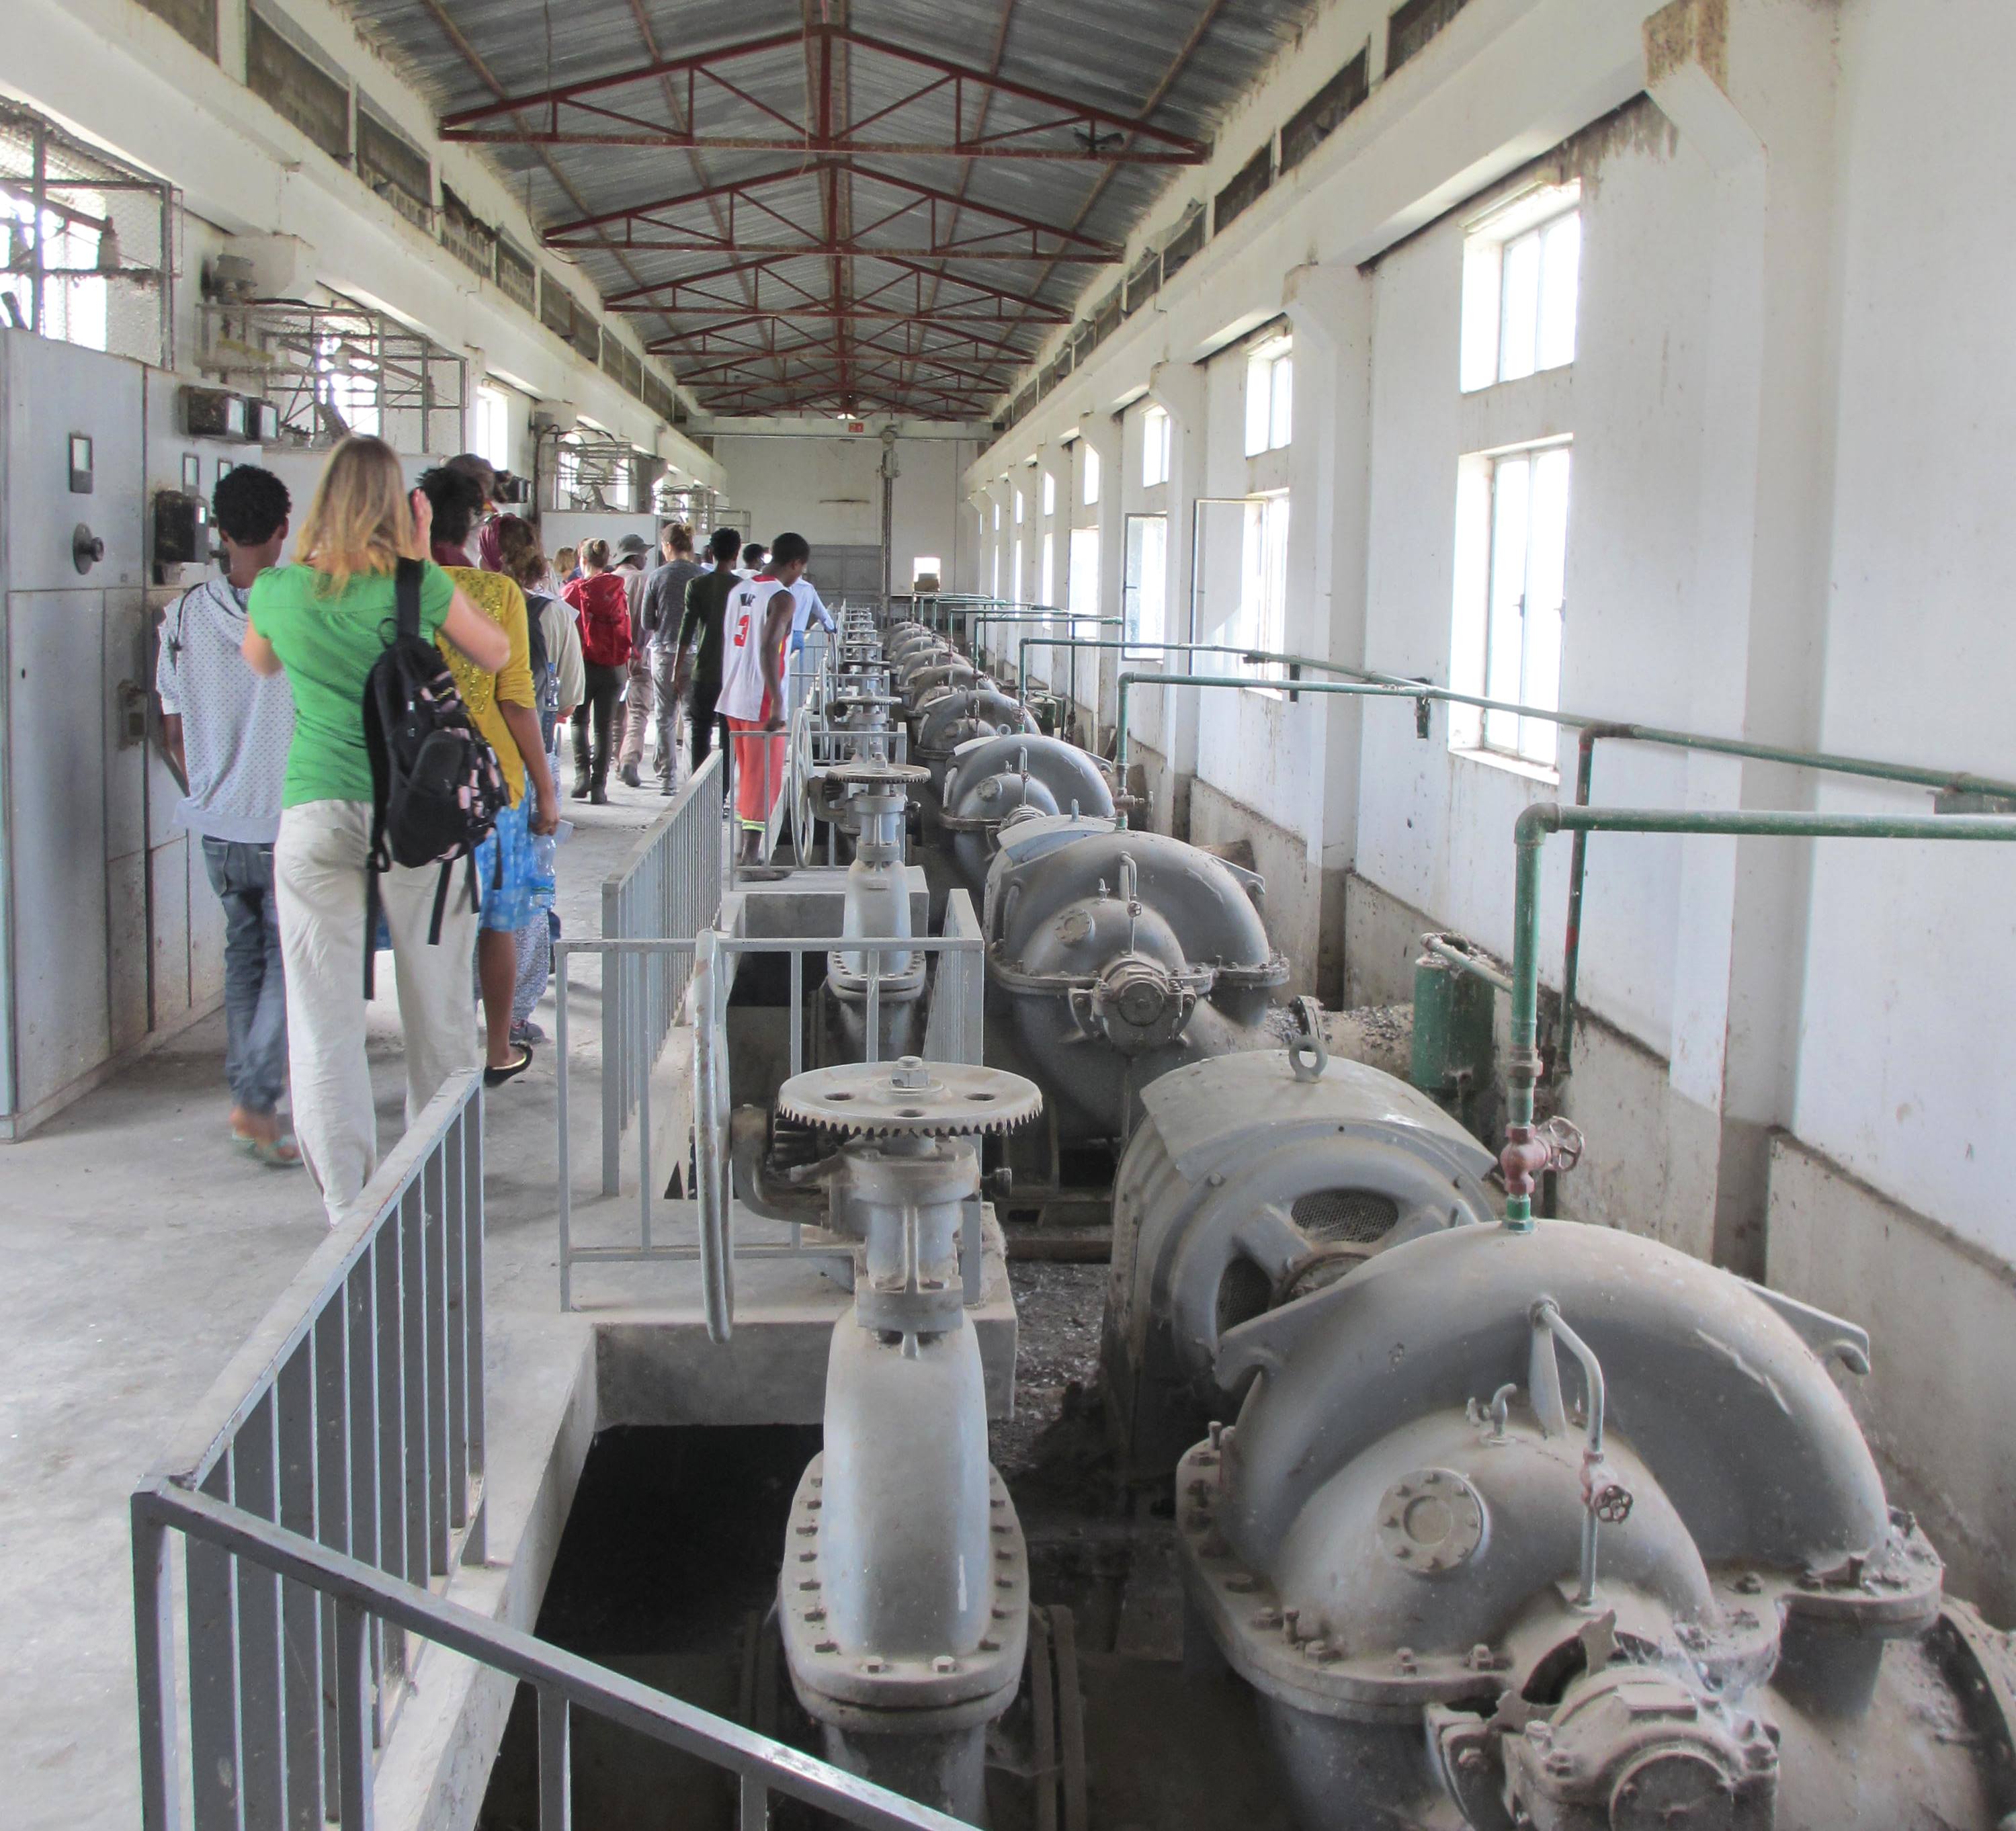 Students and staff visiting the irrigation facility in Meki area